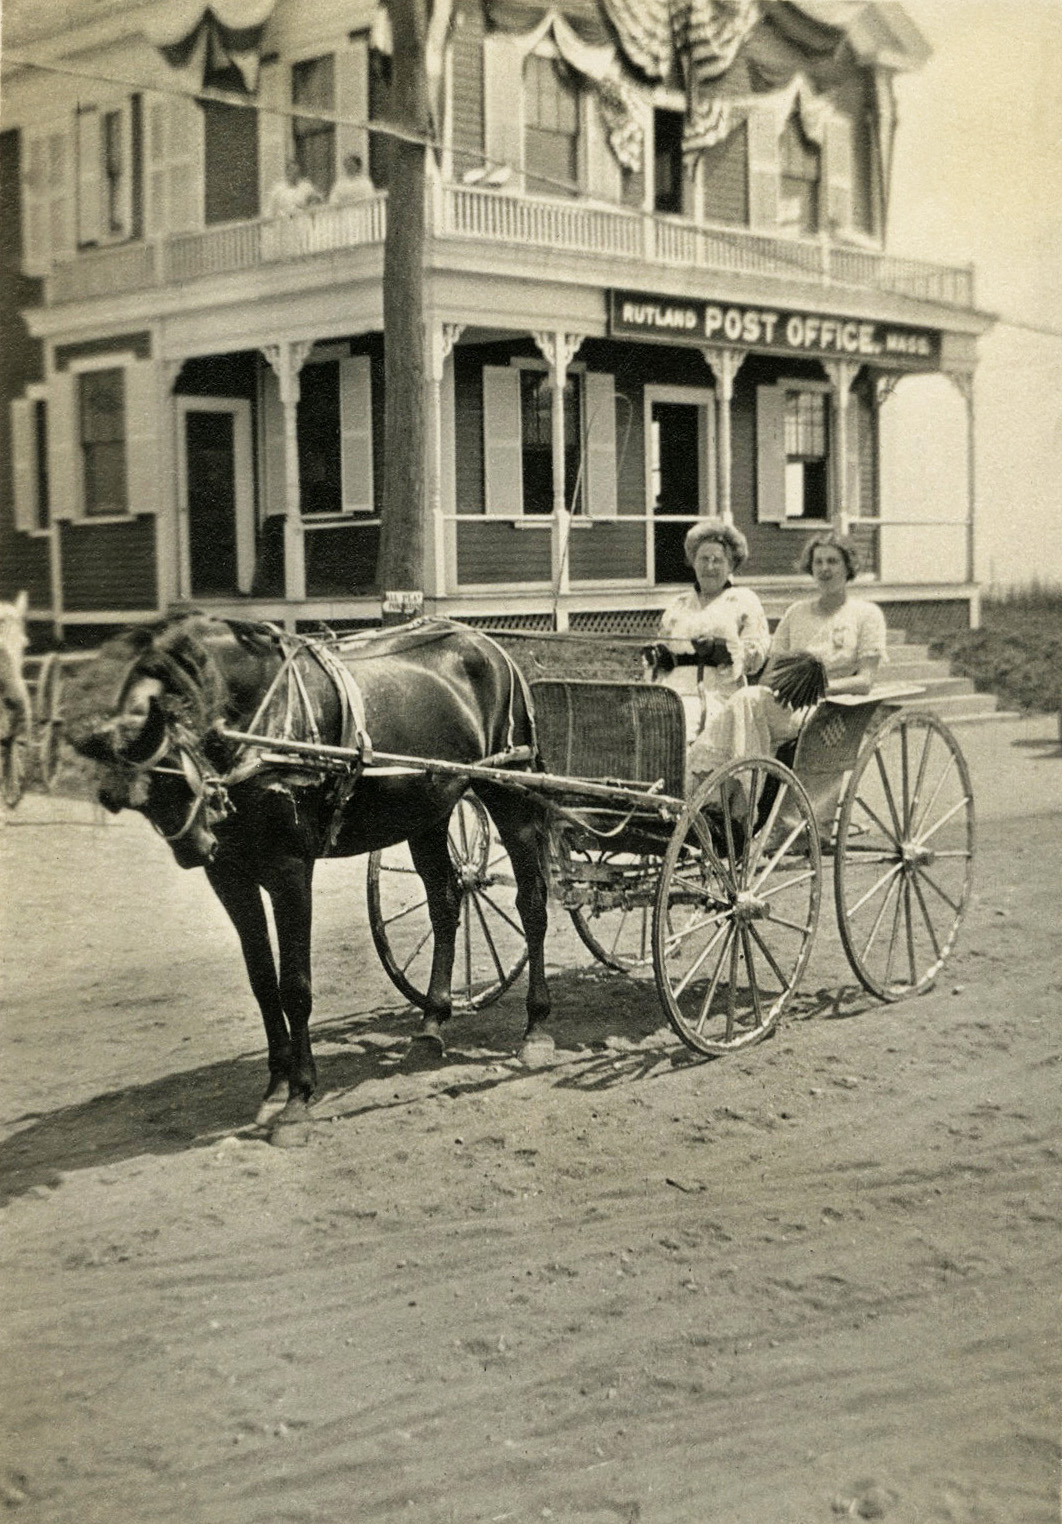 Two of my ancestors in a carriage outside of a post office in Rutland, Massachusetts in 1914. View full size.